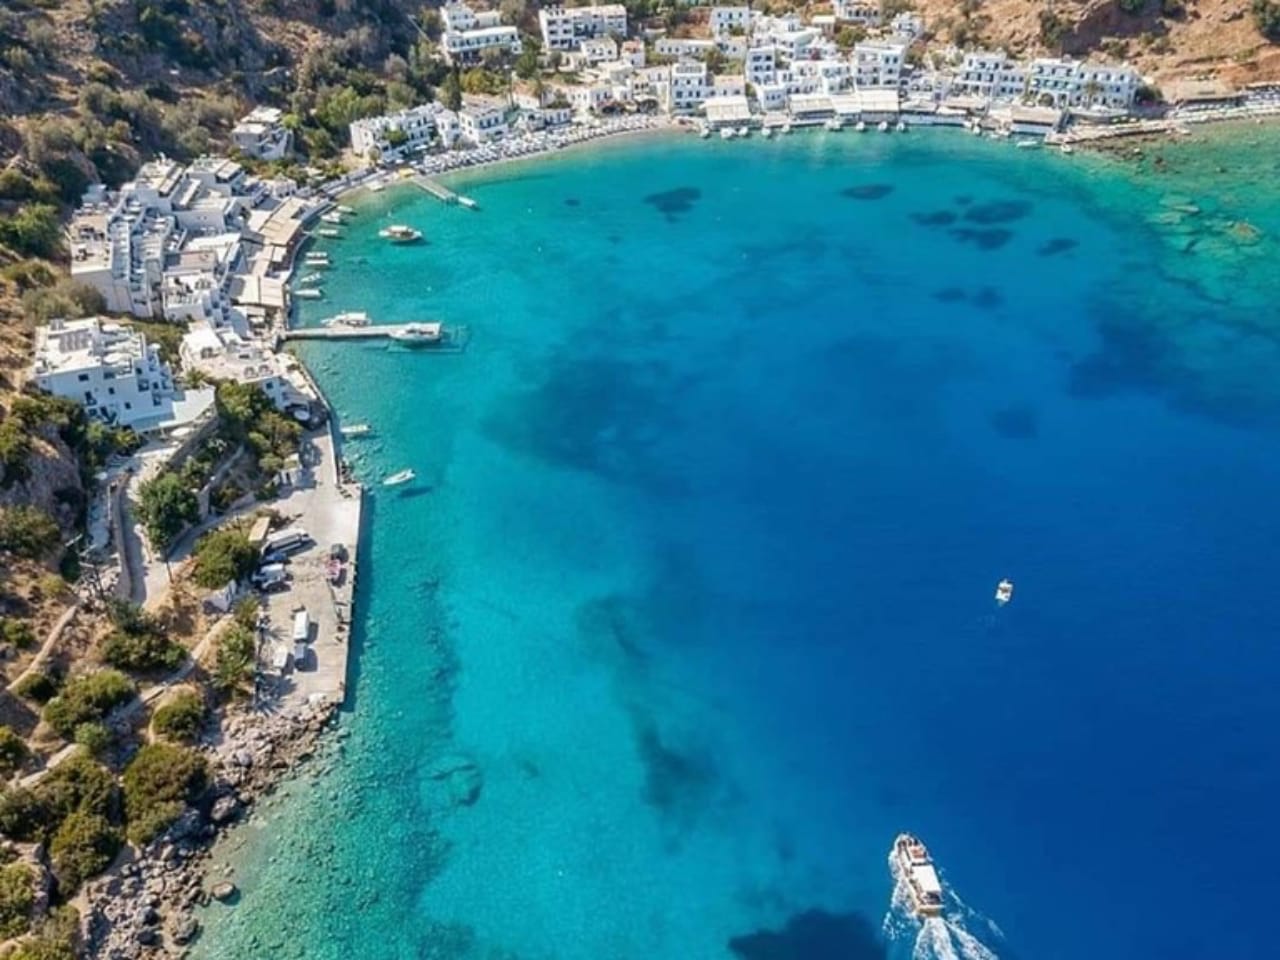 travel guide loutro village, loutro village best hotels, loutro village where to stay, activities loutro village, apartments studios rooms loutro village, ferry loutro village, hiking loutro village, sea kayak loutro village, sailing sfakia loutro, travel tips loutro village